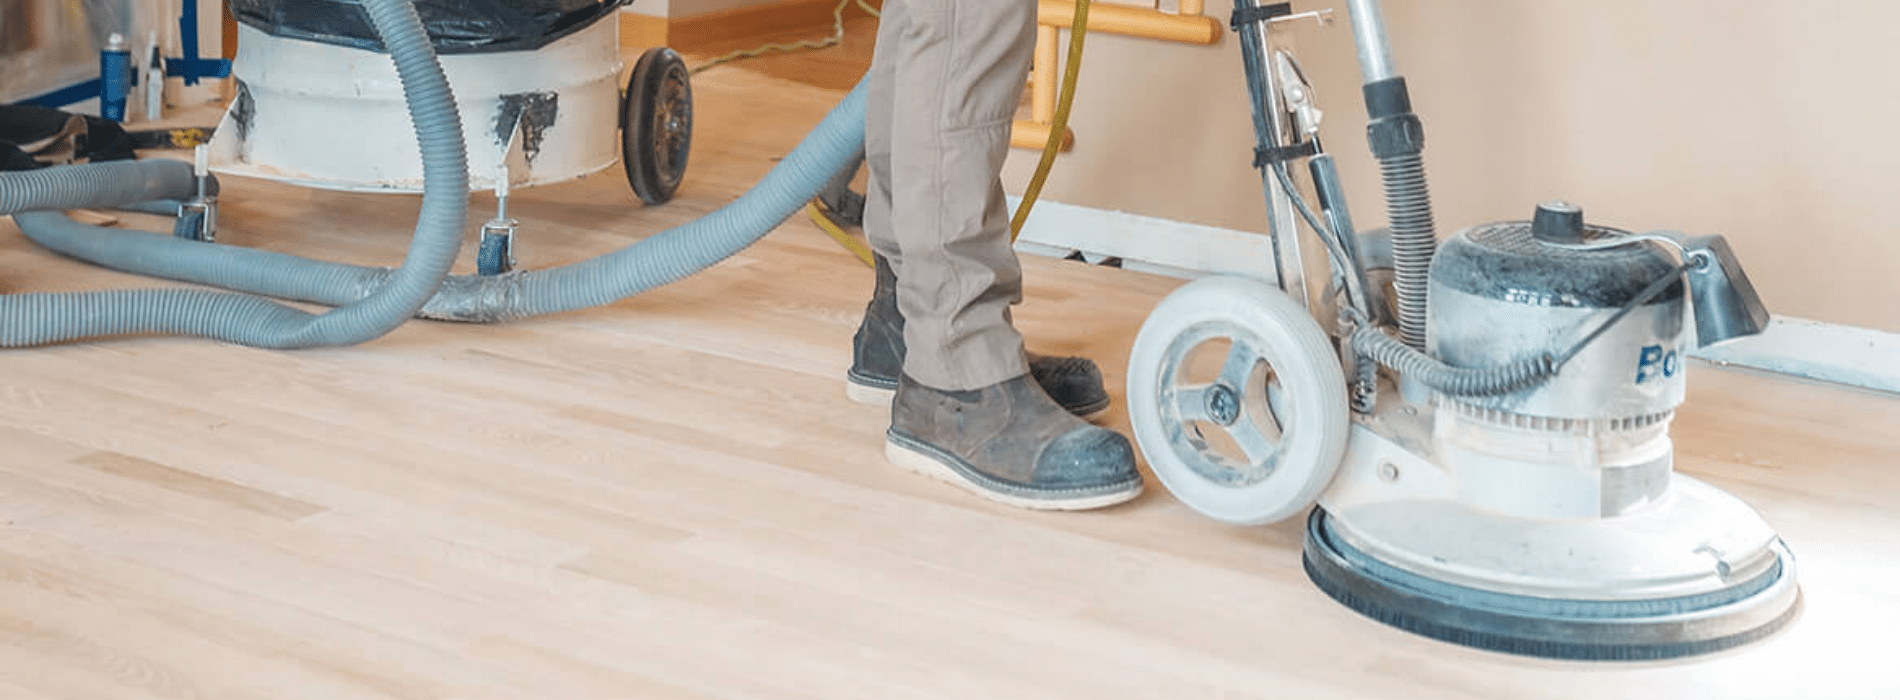 In Chislehurst, BR7, The Mr Sander® are using a Bona FlexiSand 1.9, a powerful buffer sander with a Ø 407 mm dimension, 1.9 kW effect, and 230 V voltage. It operates at a frequency of 50 Hz/60 Hz and is connected to a dust extraction system with a HEPA filter for optimal cleanliness and efficiency during the sanding of a parquet floor. 